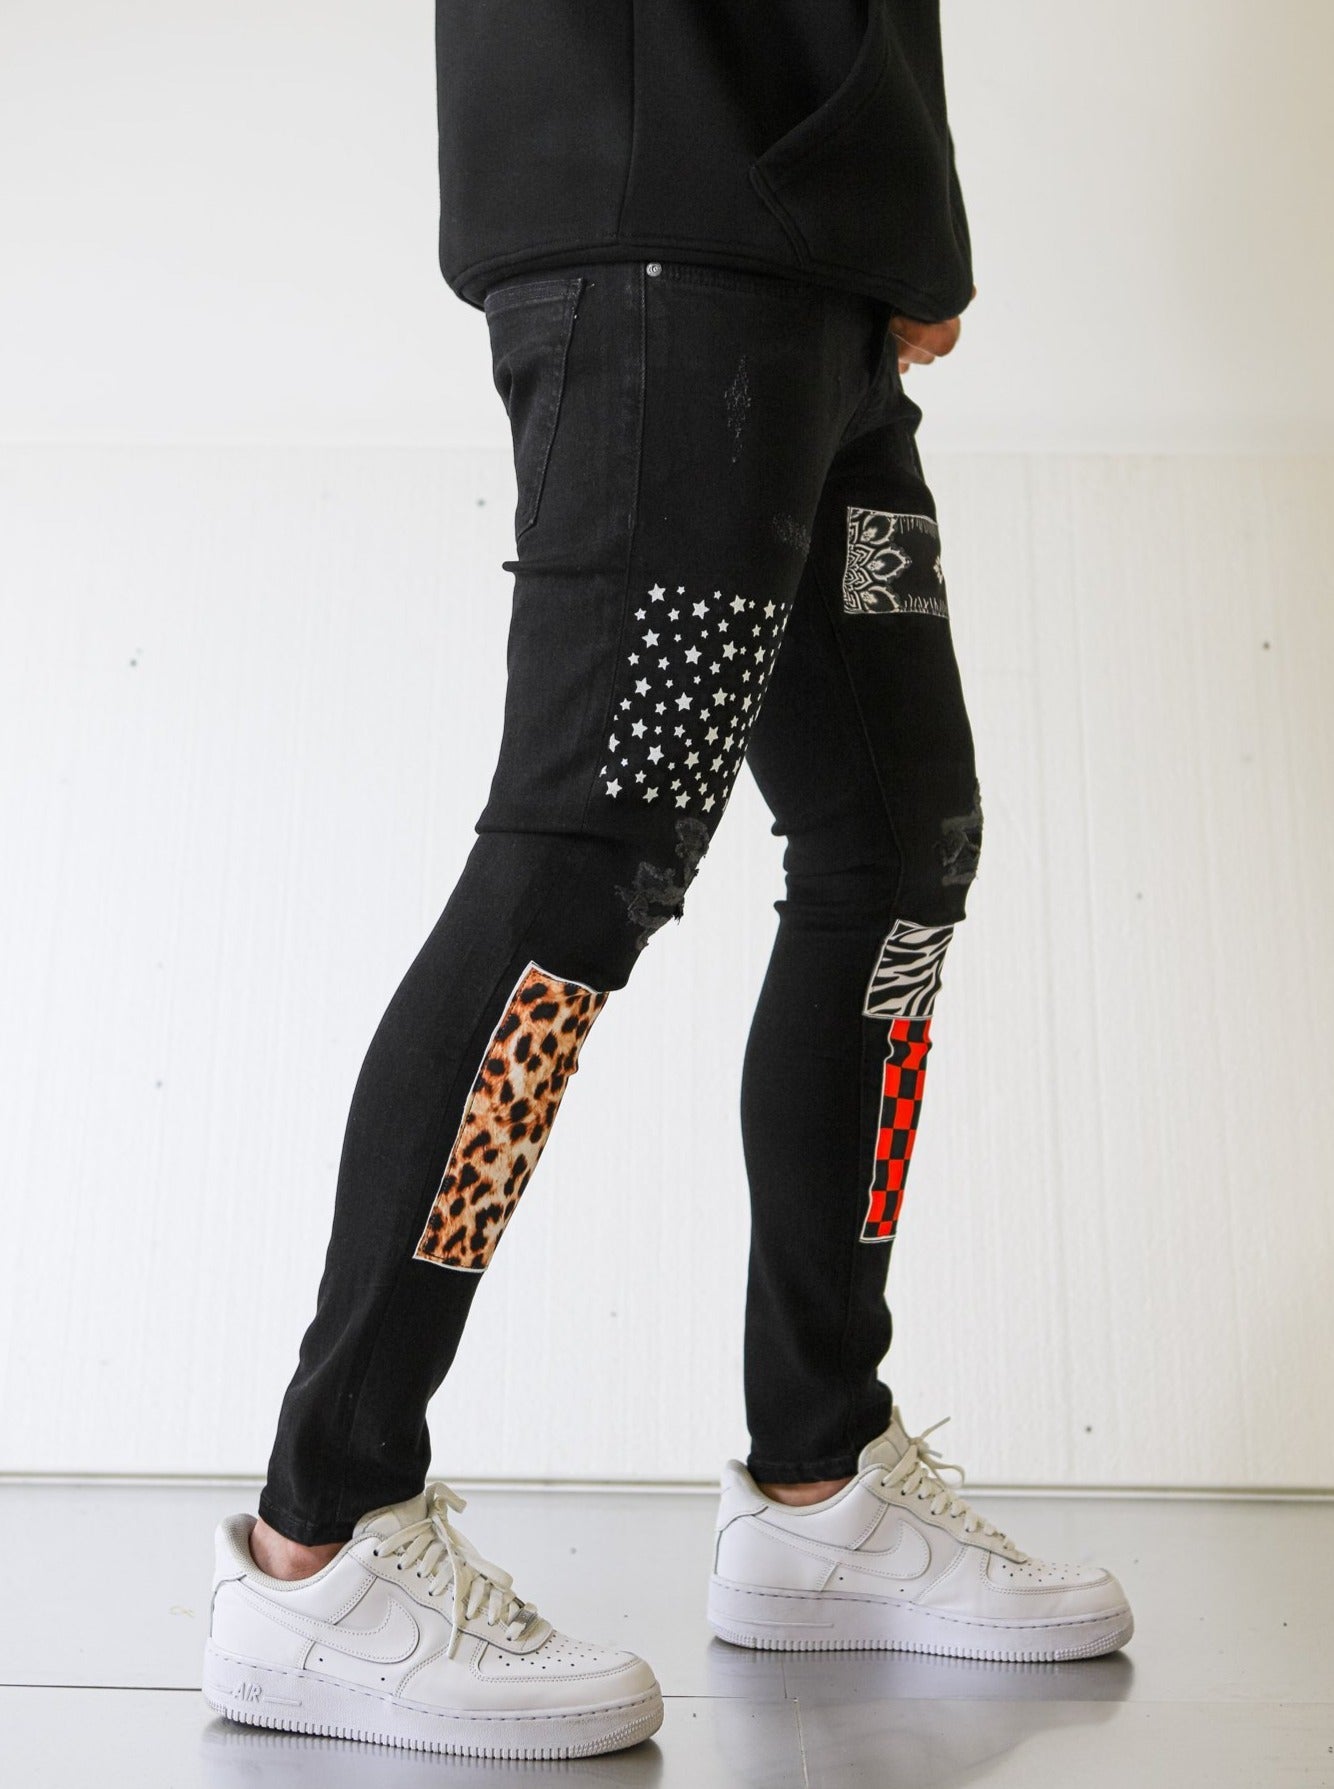 Patched Black Skinny Jeans - UNEFFECTED STUDIOS® - JEANS - UNEFFECTED